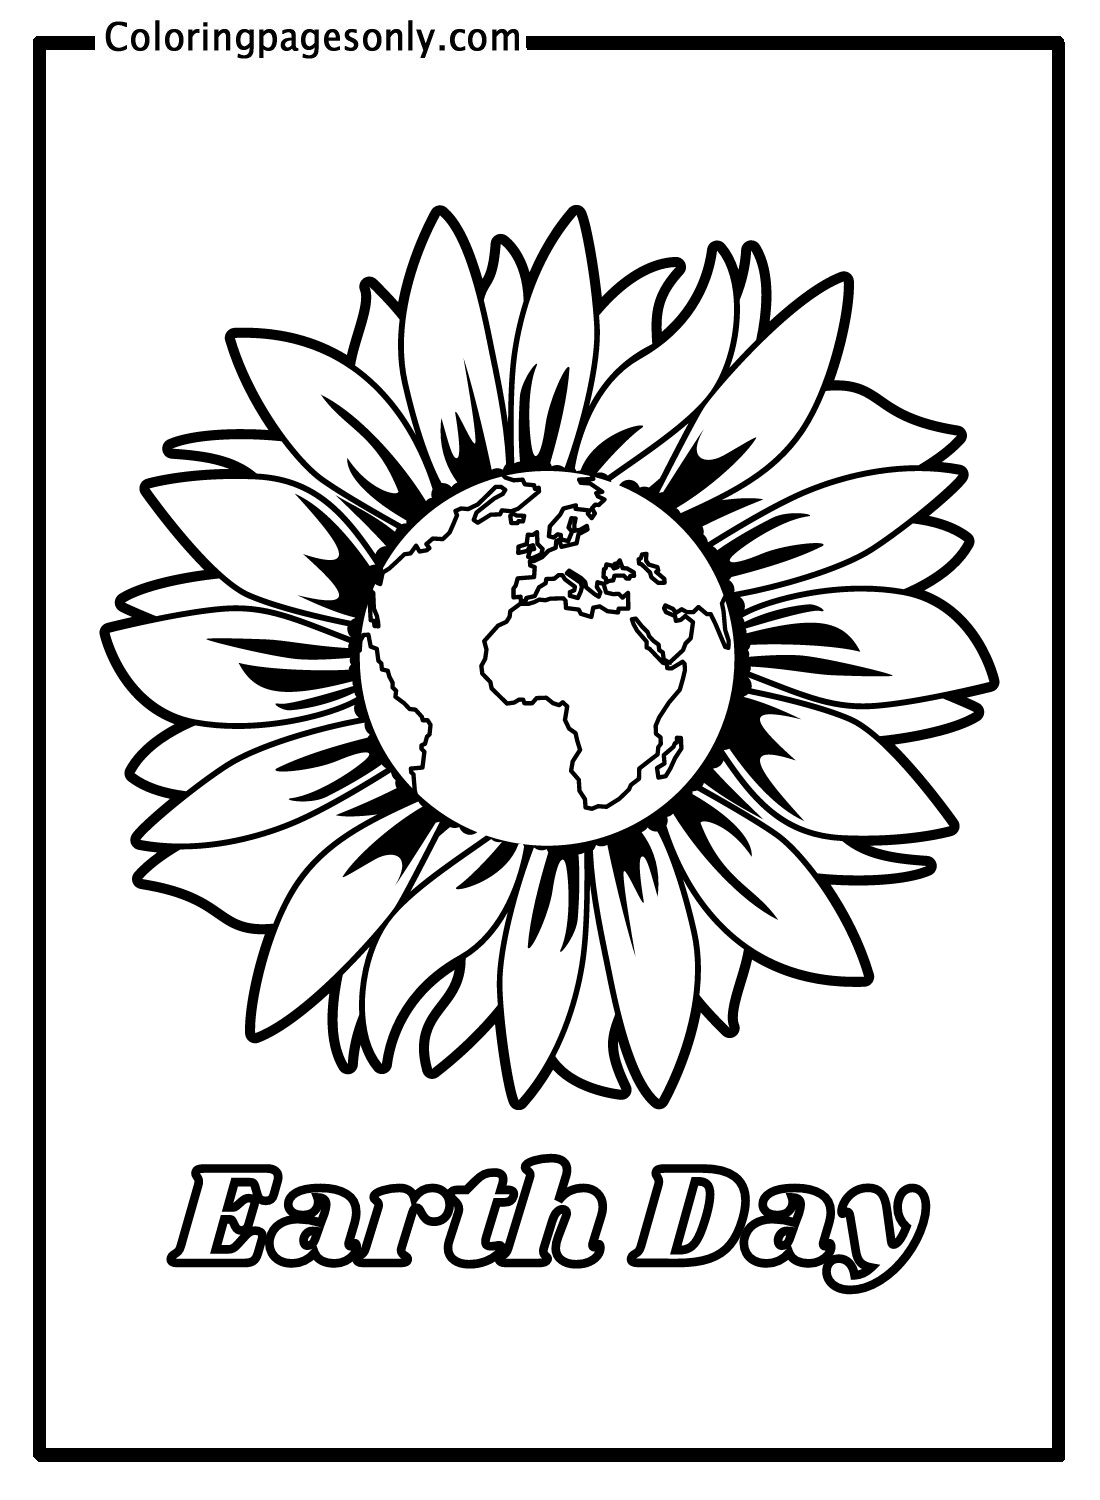 Earth Day to Download Coloring Page